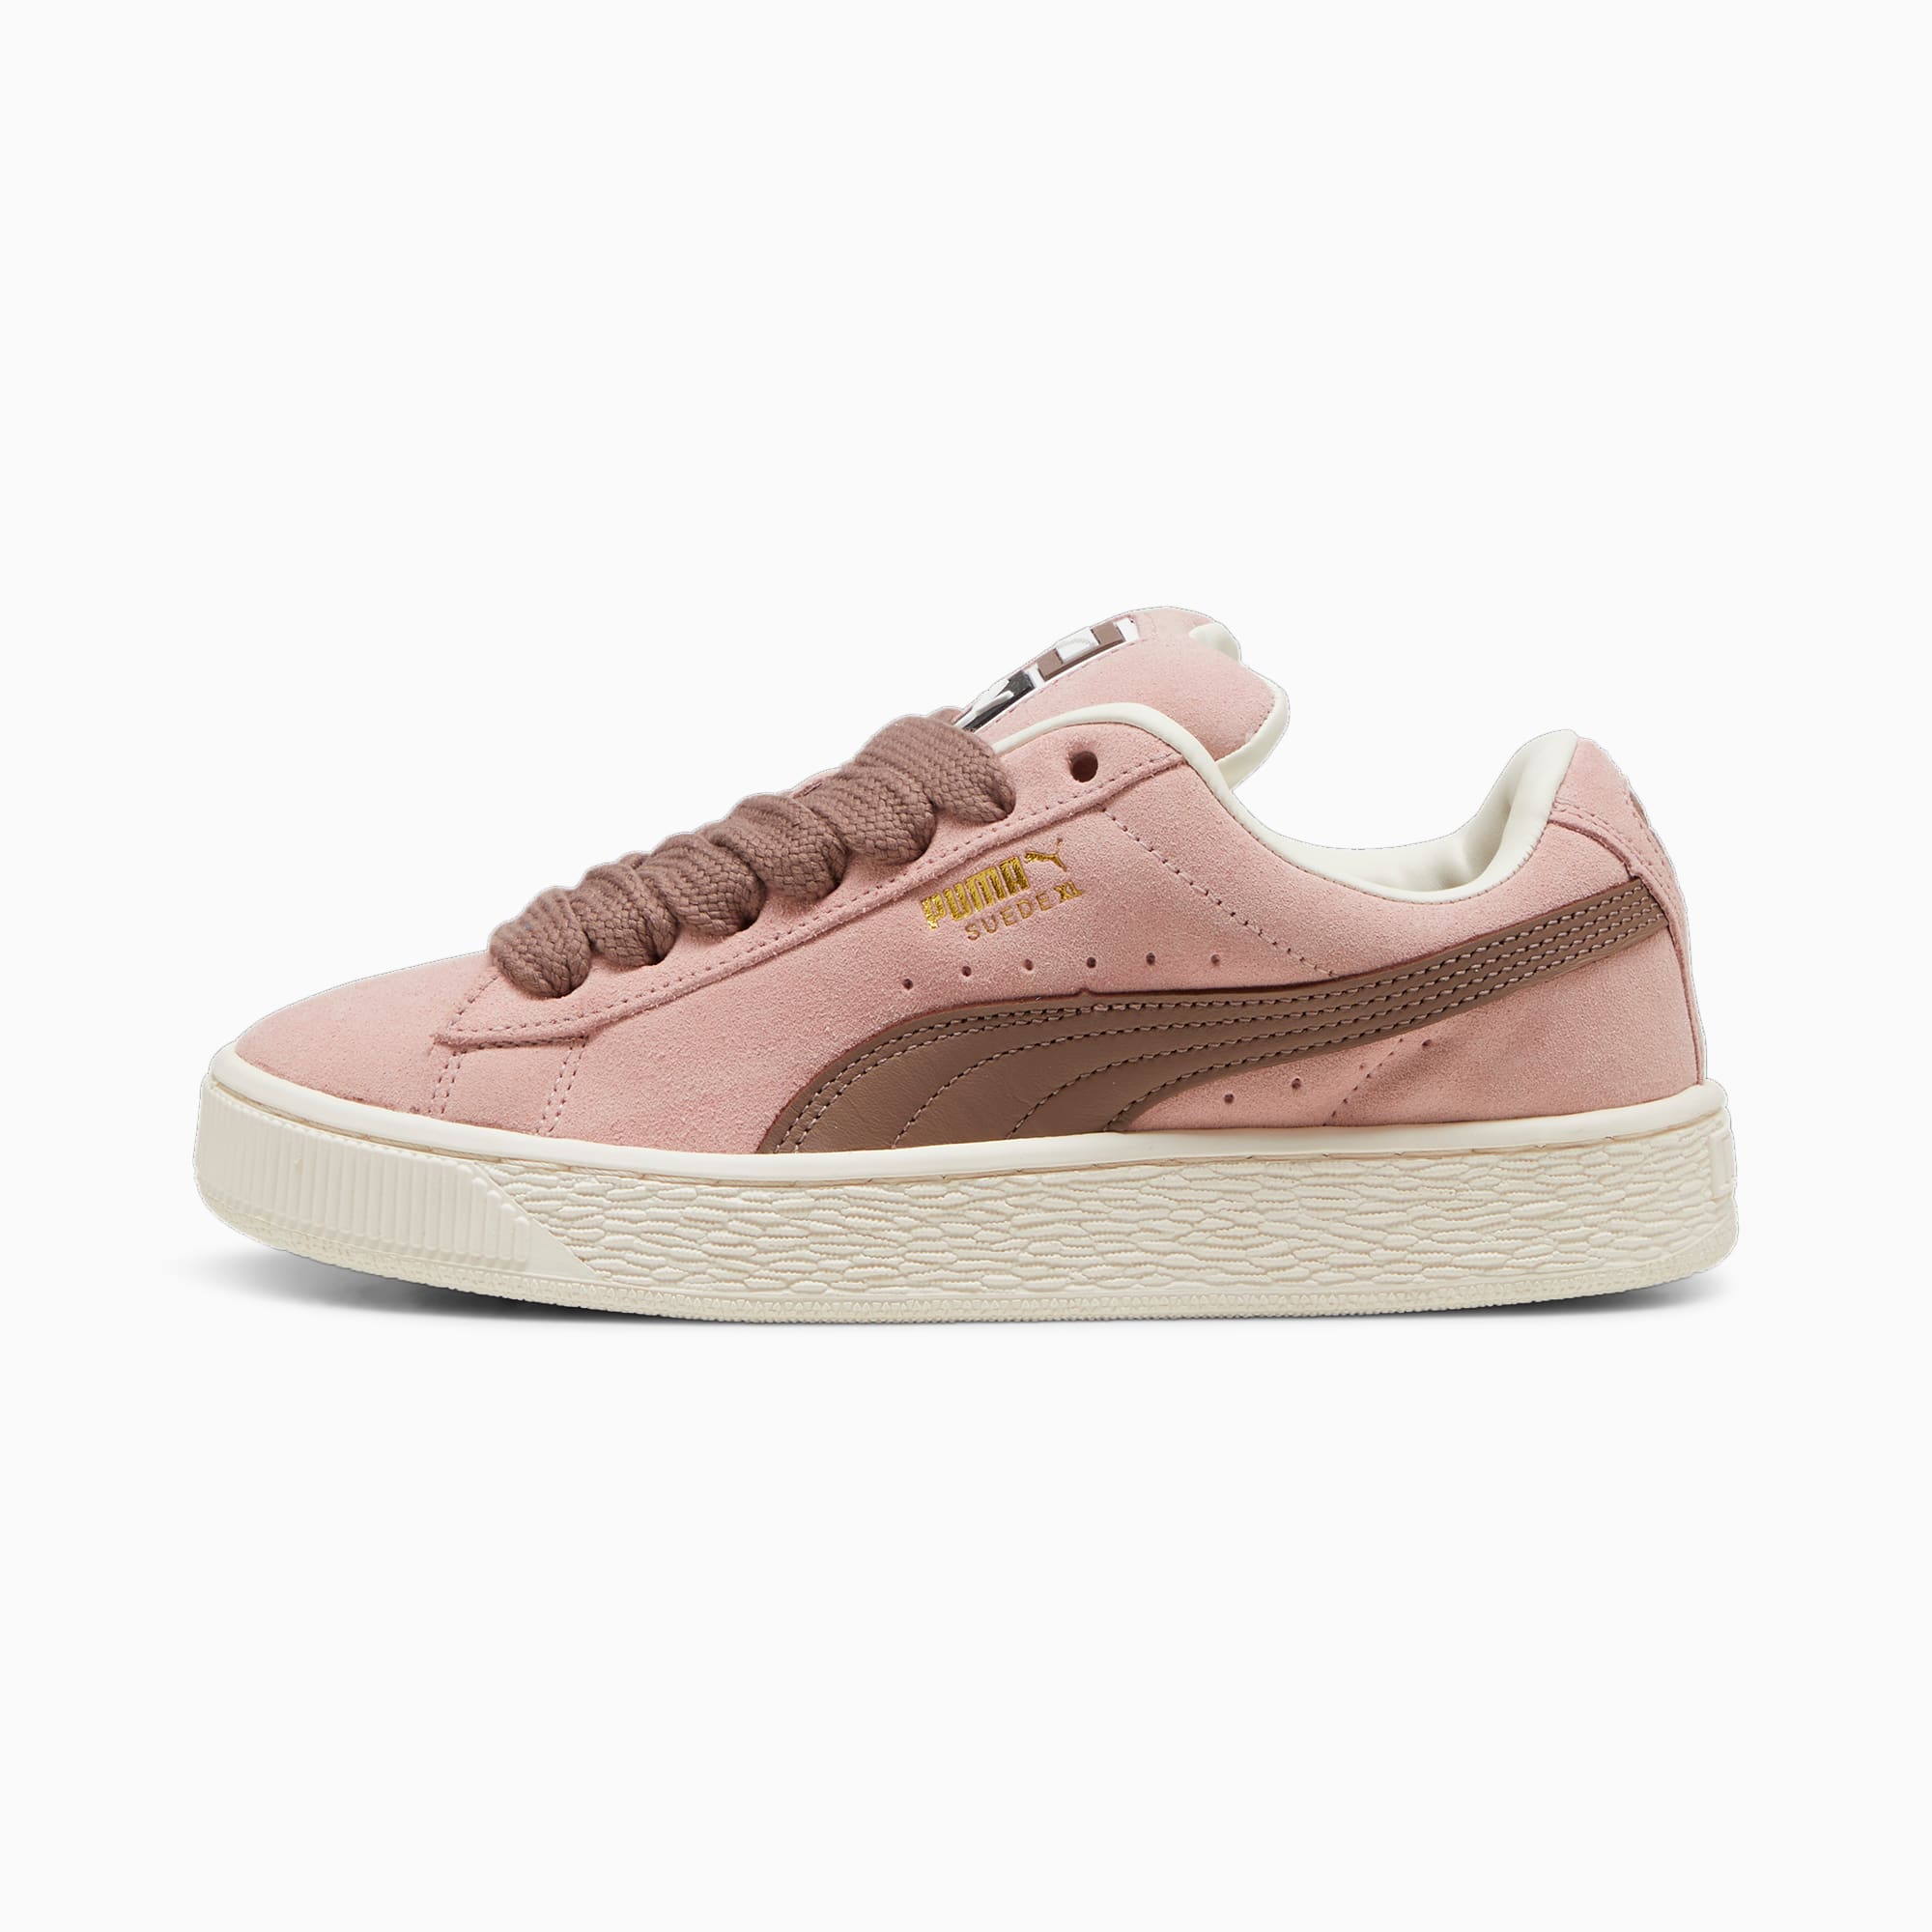 PUMA Suede Xl Sneakers Women, Future Pink/Warm White, Size 35,5, Shoes